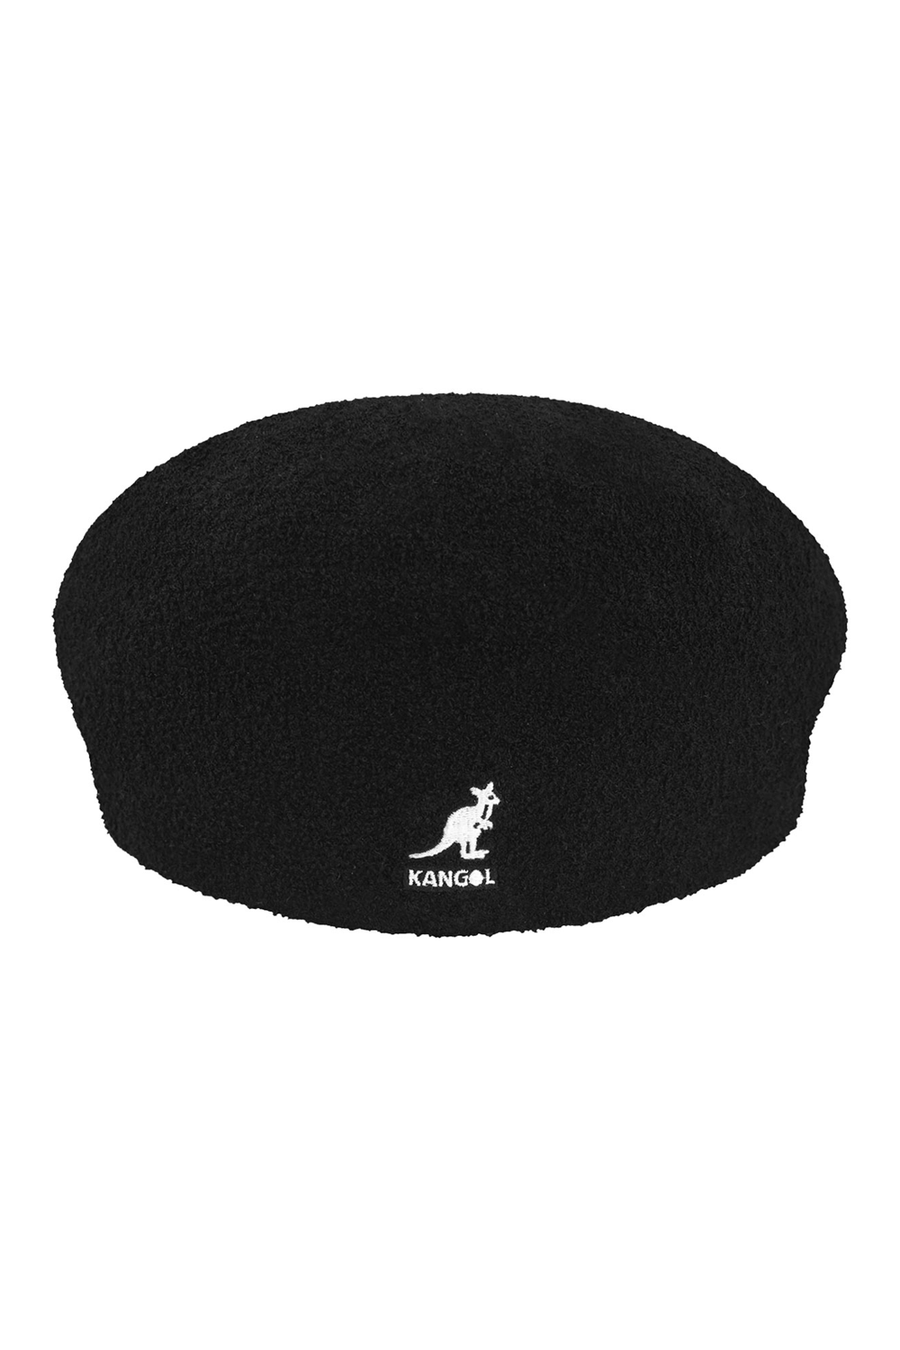 Buy the Kangol Bermuda 504 Hat in Black at Intro. Spend £50 for free UK delivery. Official stockists. We ship worldwide.